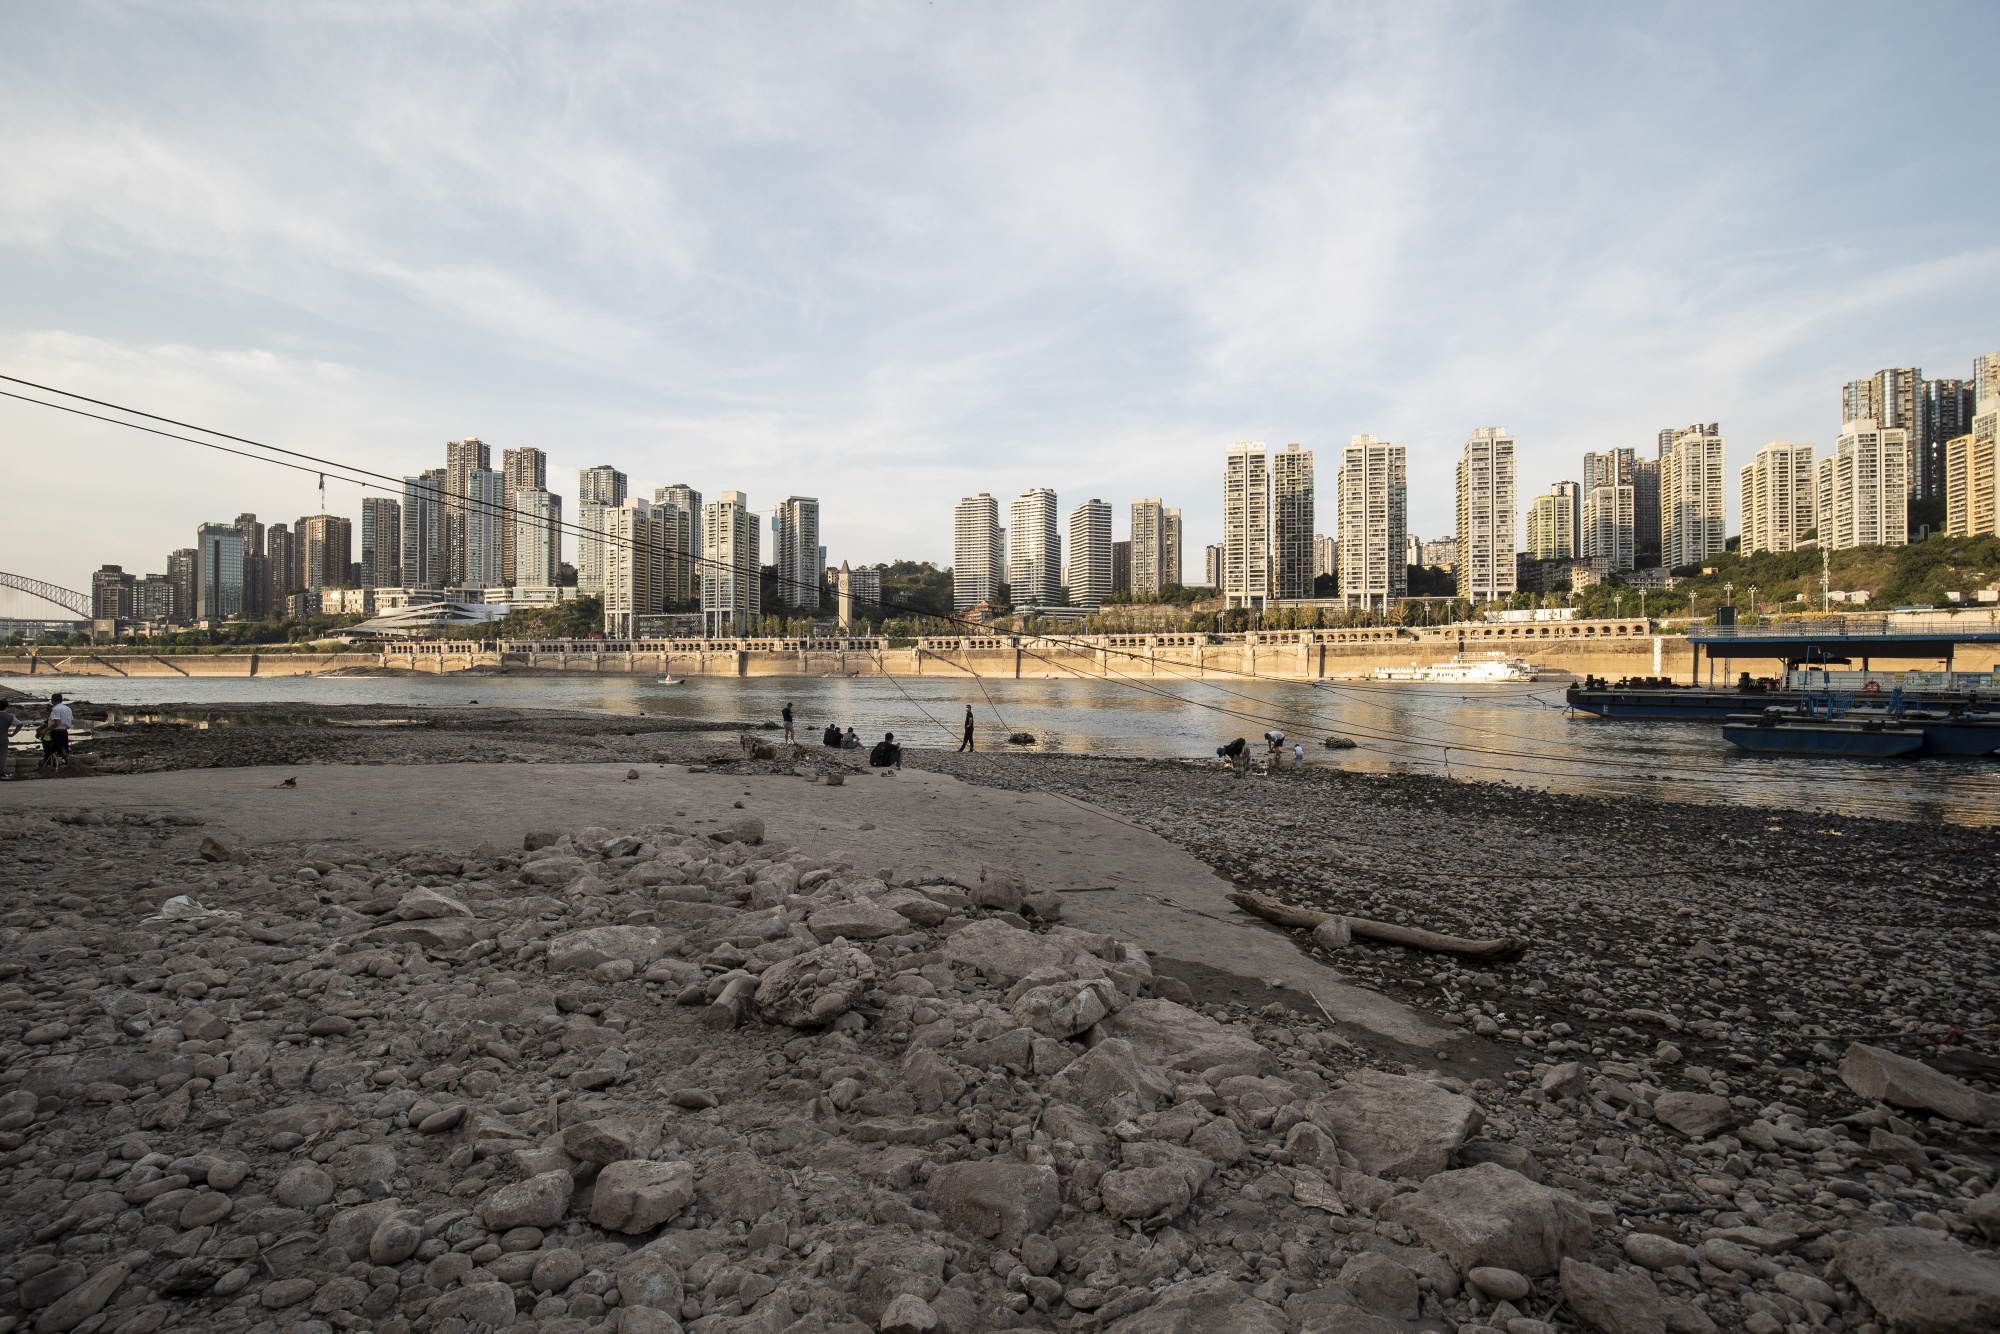 The shallow banks of Yangtze River, due to low water levels caused by drought, near the confluence with the Jialing River in Chongqing, China, on Aug. 19.